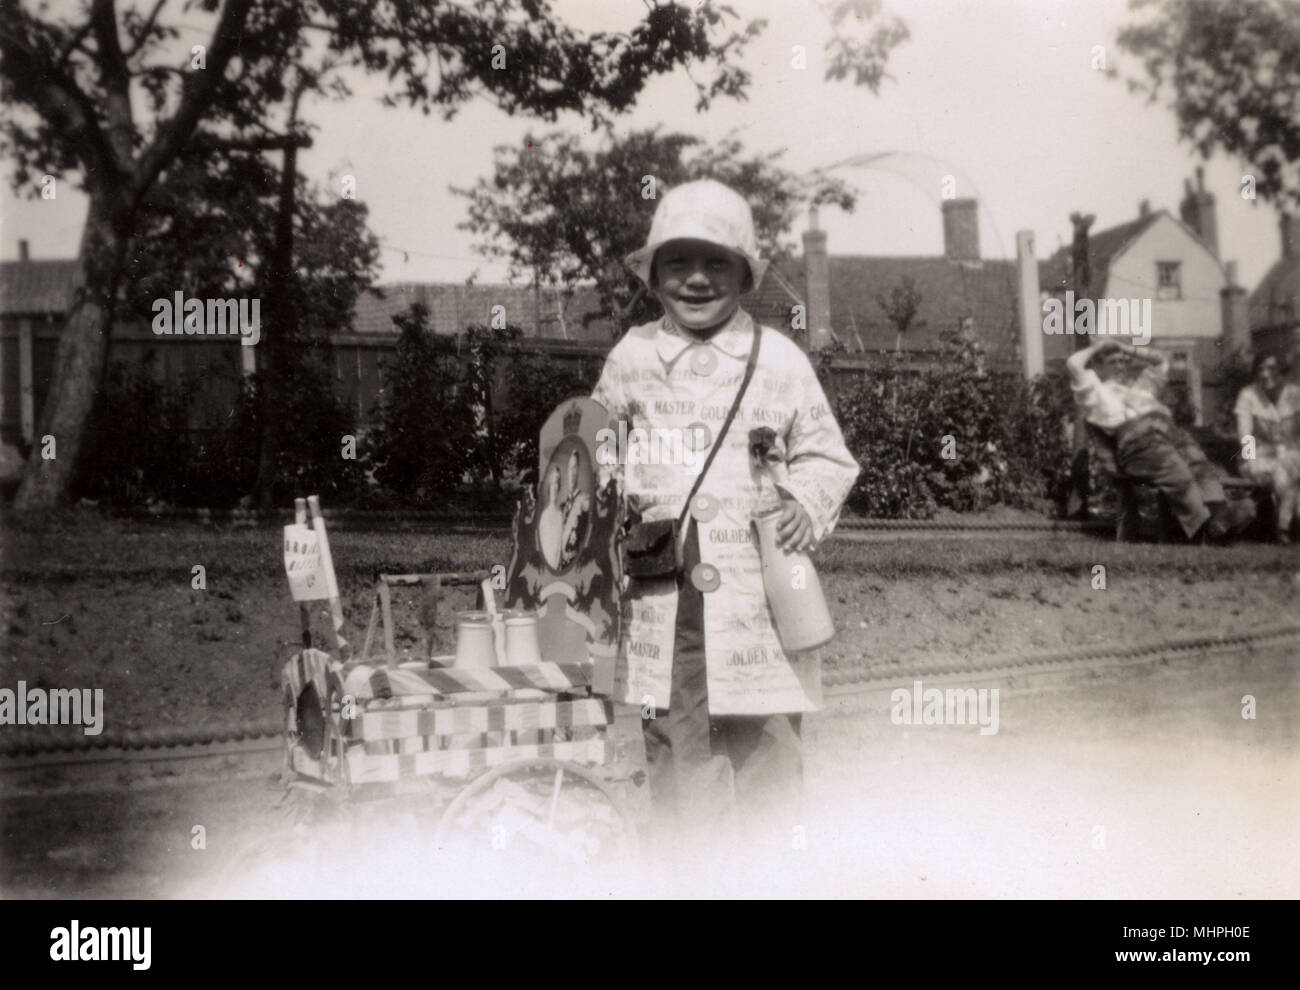 A little girl dressed up as a milkman (or milk woman), complete with her miniature milk float.  The photograph of King George VI and Queen Elizabeth probably dates this image as 1937 as it seems a likely costume to be included in a carnival or parade to celebrate the Coronation that year.       Date: 1937 Stock Photo